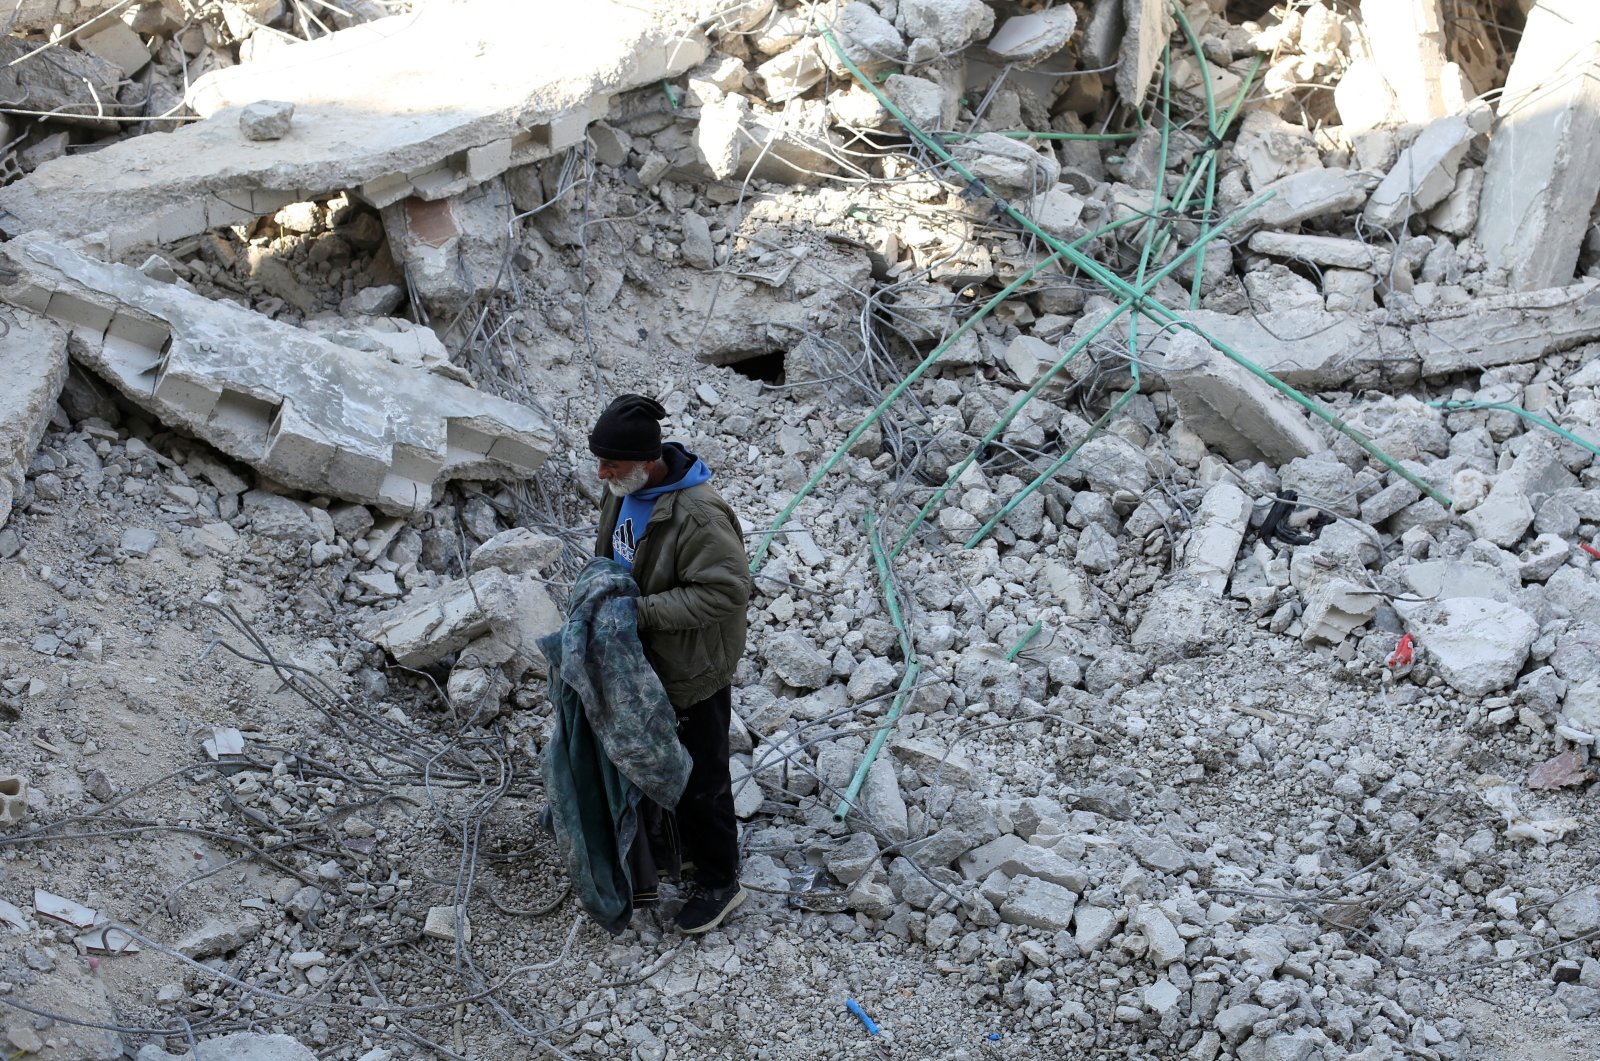 Syrian father Nader Fadil, who lost his wife and two children in the earthquake, stands on the rubble of his damaged home, Jableh, Syria, Feb. 12, 2023. (Reuters Photo)